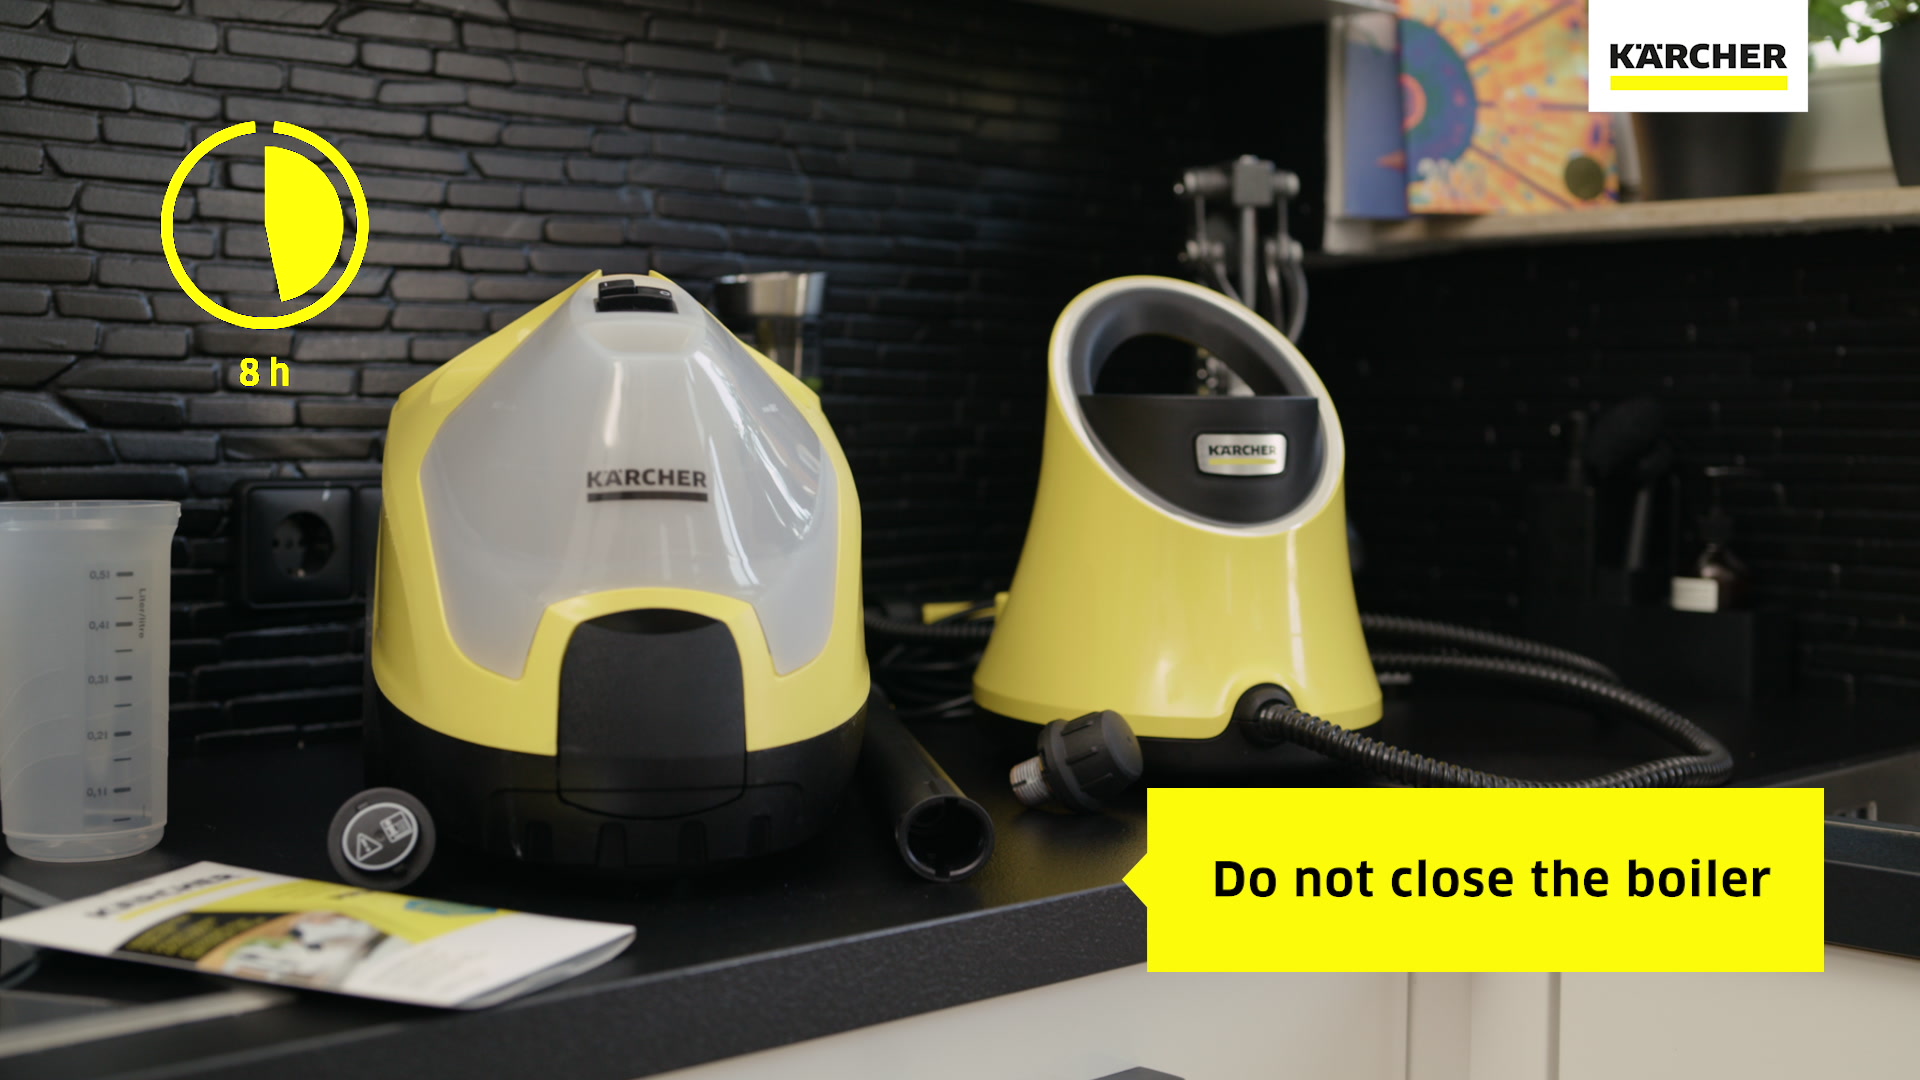 How to descale the Kärcher steam cleaner?